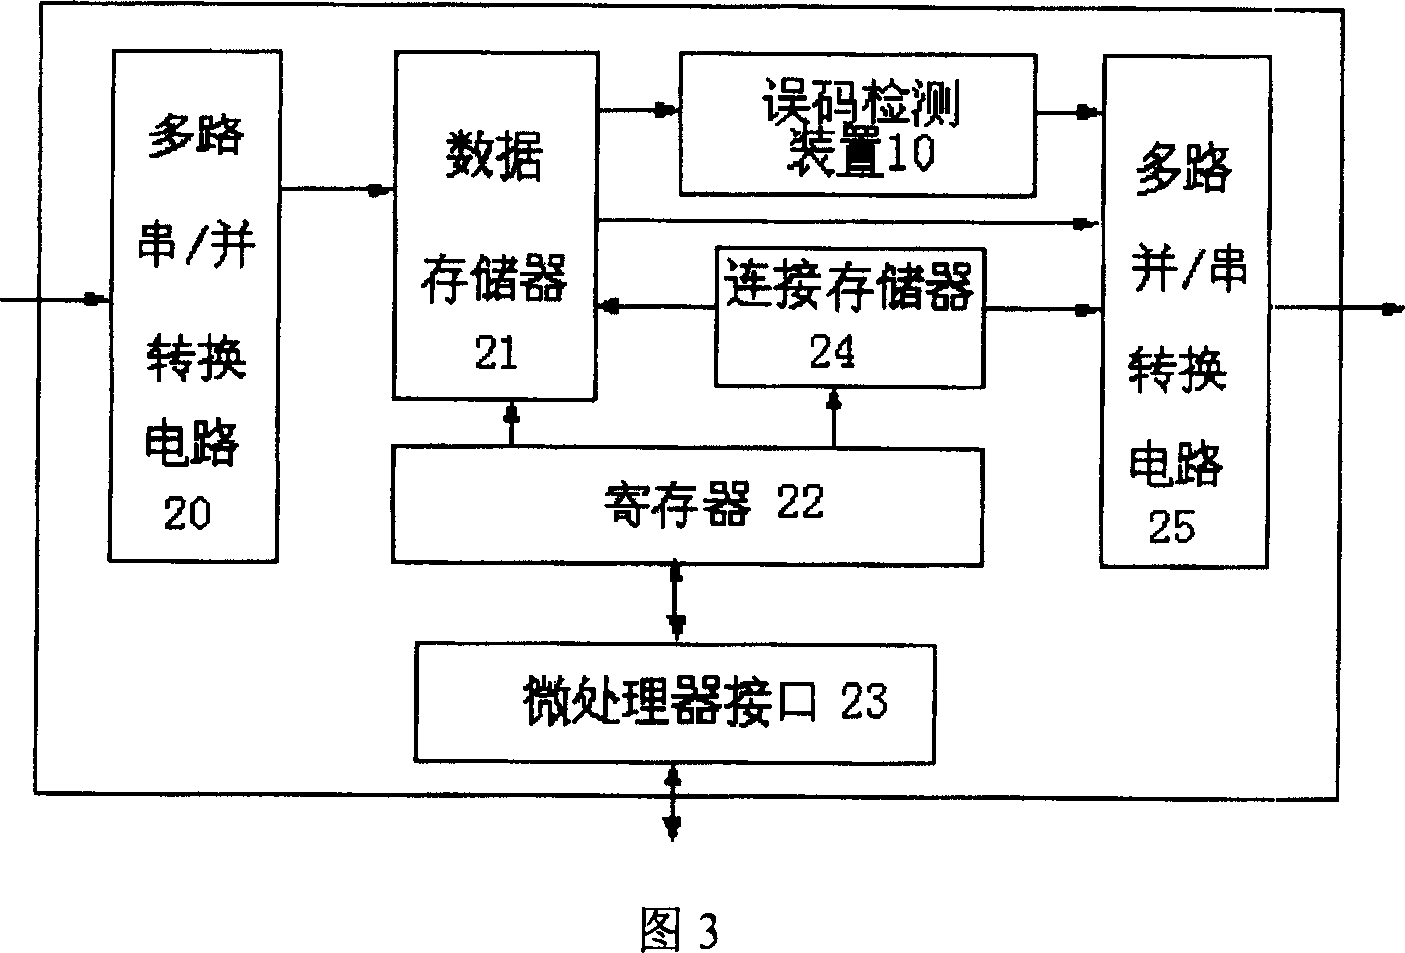 Error code detection apparatus and method for digital exchange system